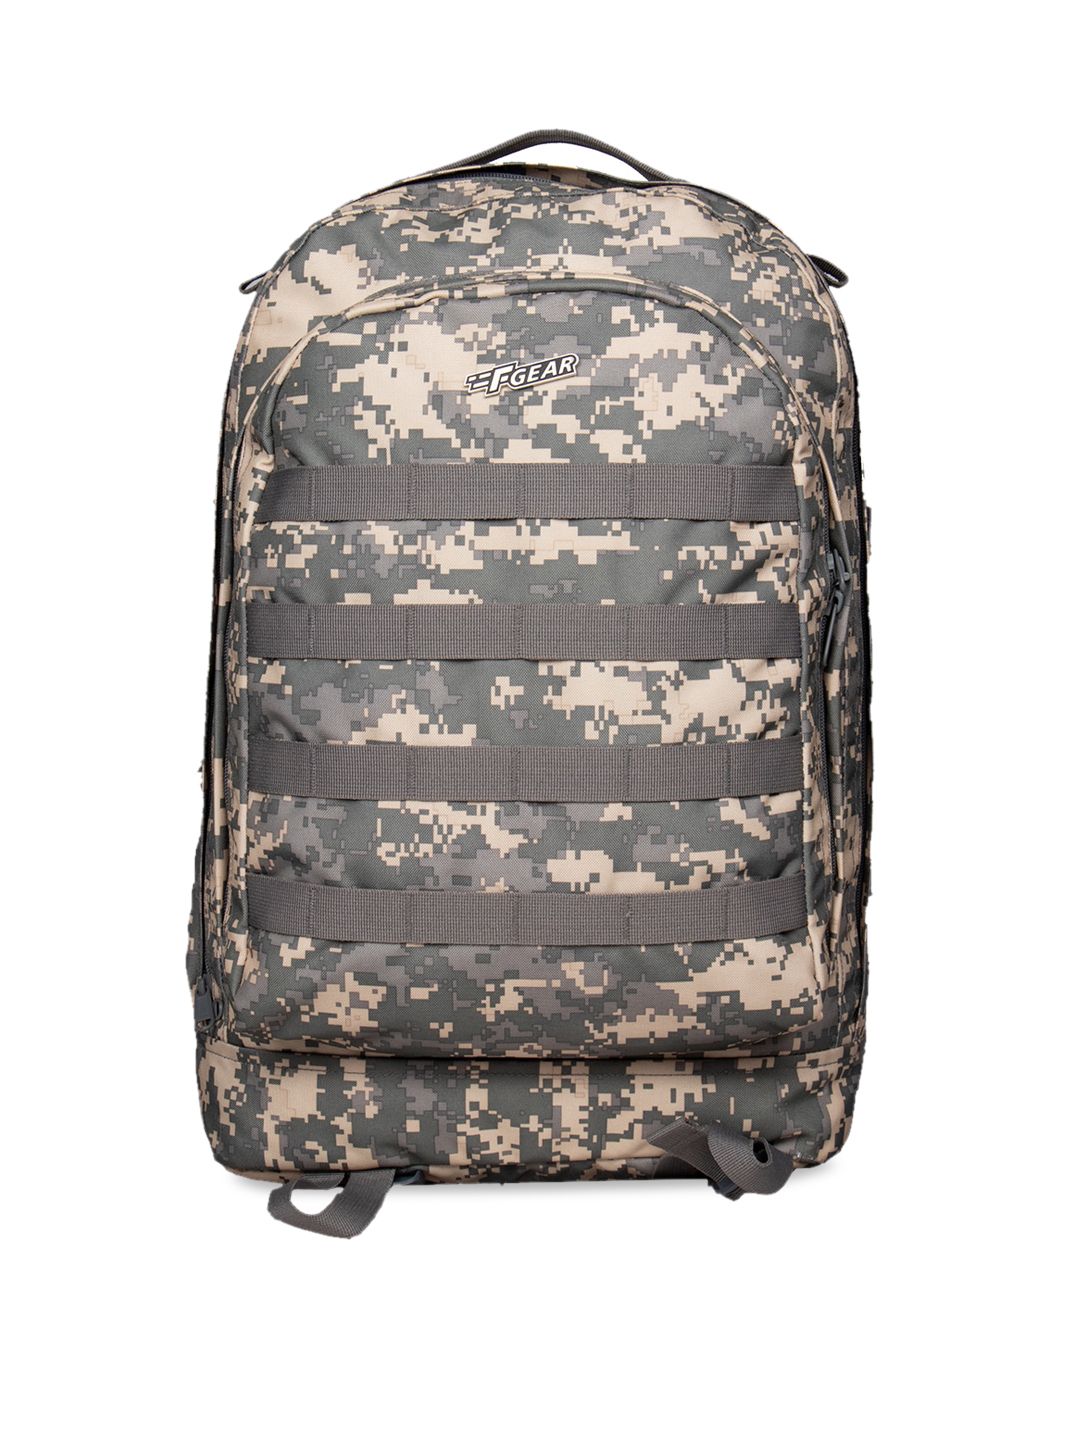 F Gear Unisex Grey & Brown Camouflage Backpack Price in India